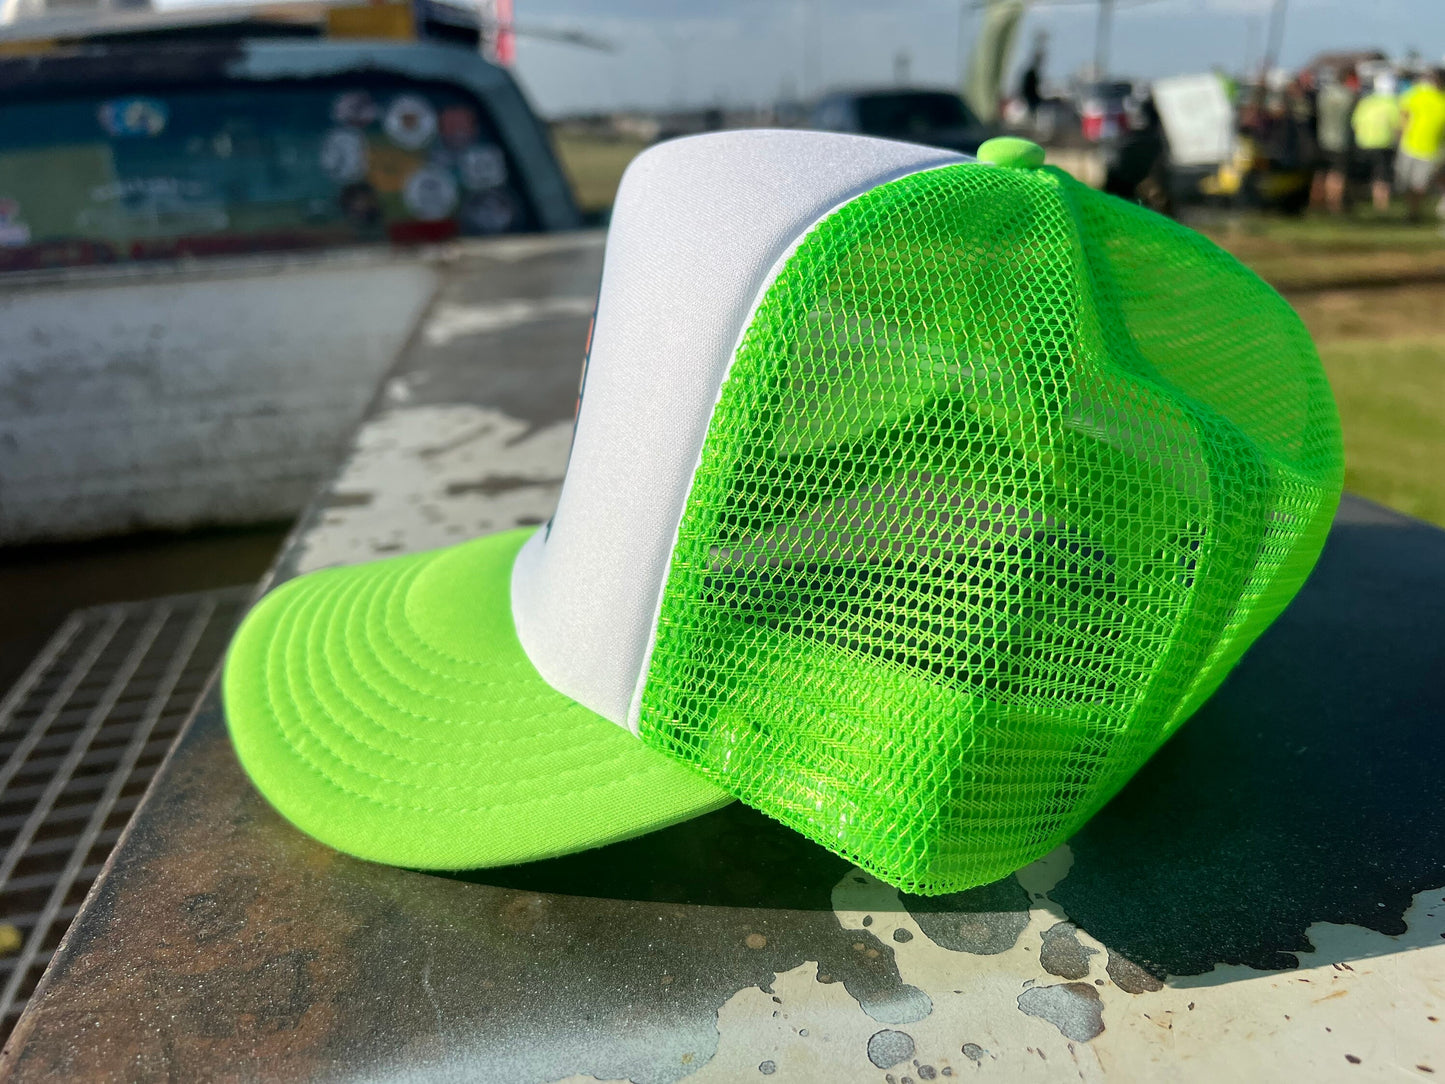 Okie Life Oklahoma Osage Shield Foam Mesh Trucker Snap Back Cap - Sublimation Print - Perfect Accessory for Casual and Outdoor Fashion